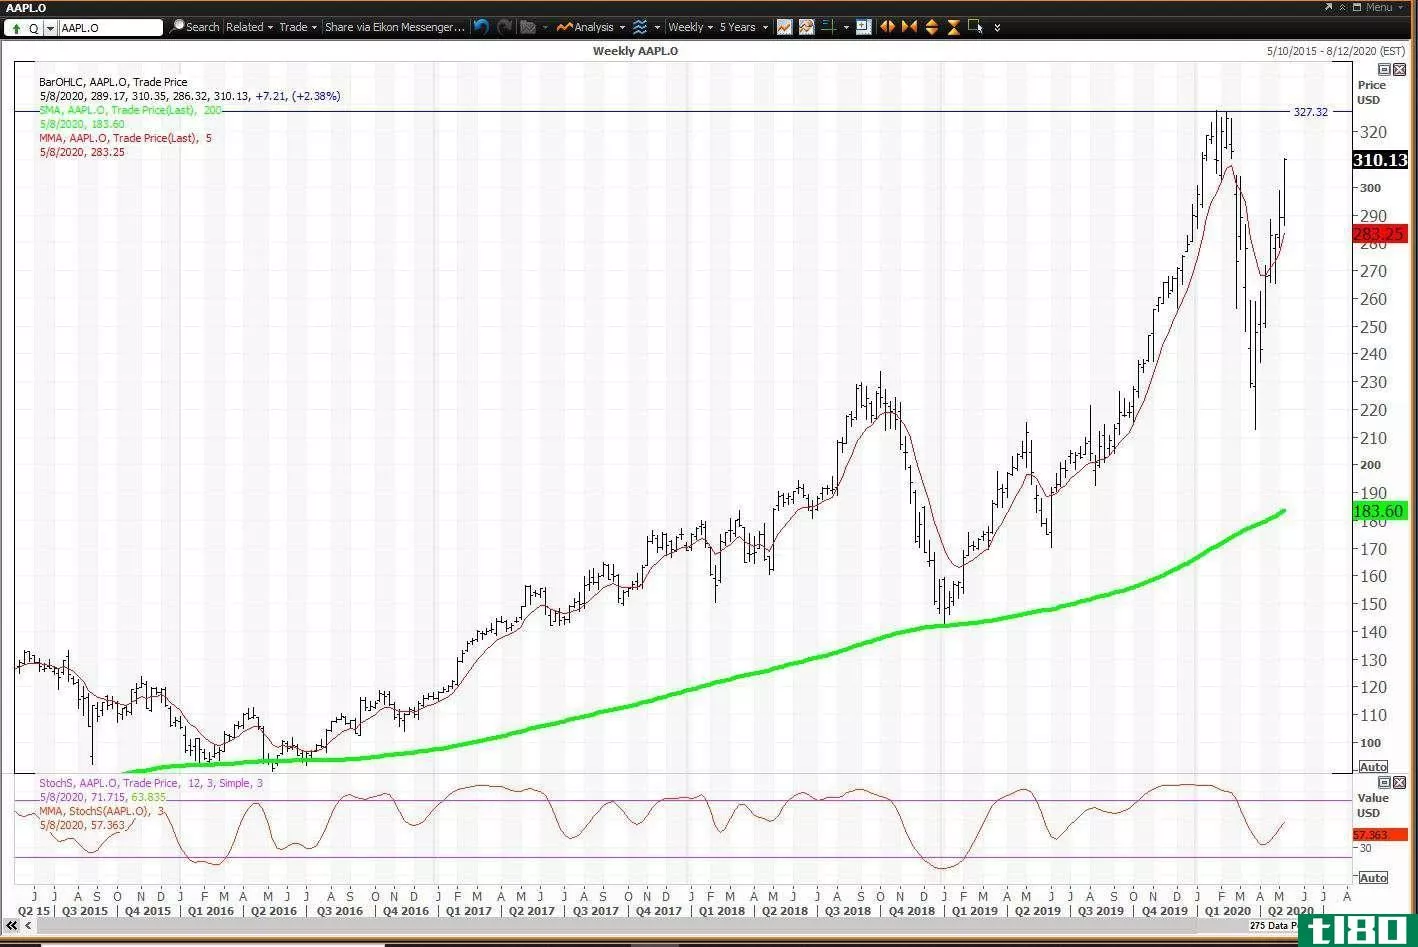 Weekly chart showing the share price performance of Apple Inc. (AAPL)